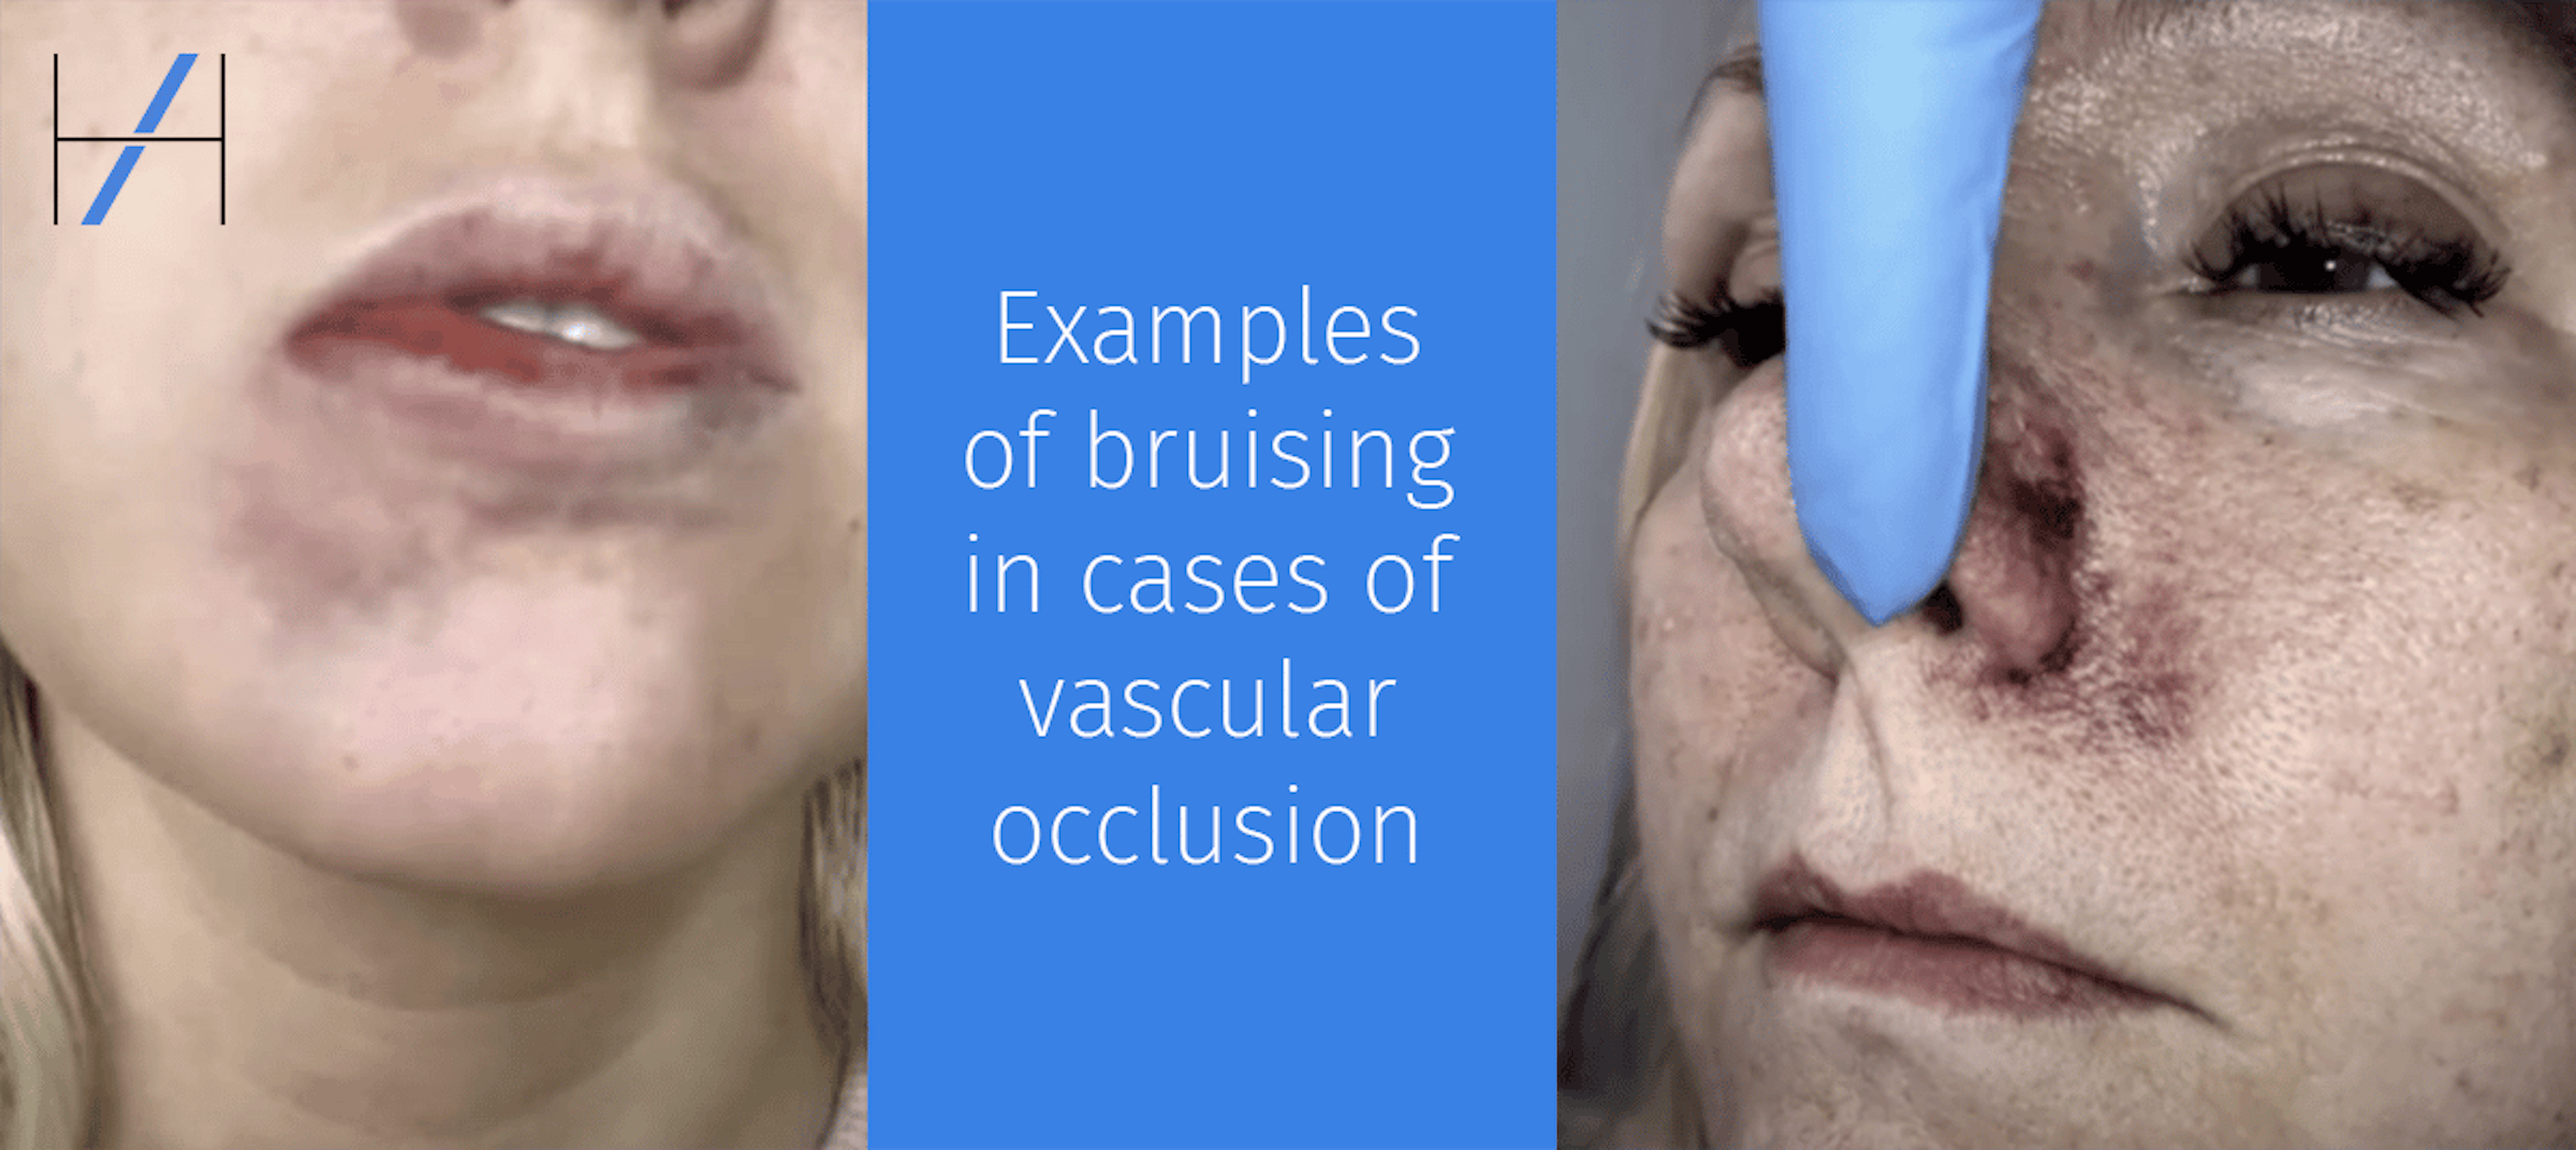 Bruising or vascular occlusion how to tell